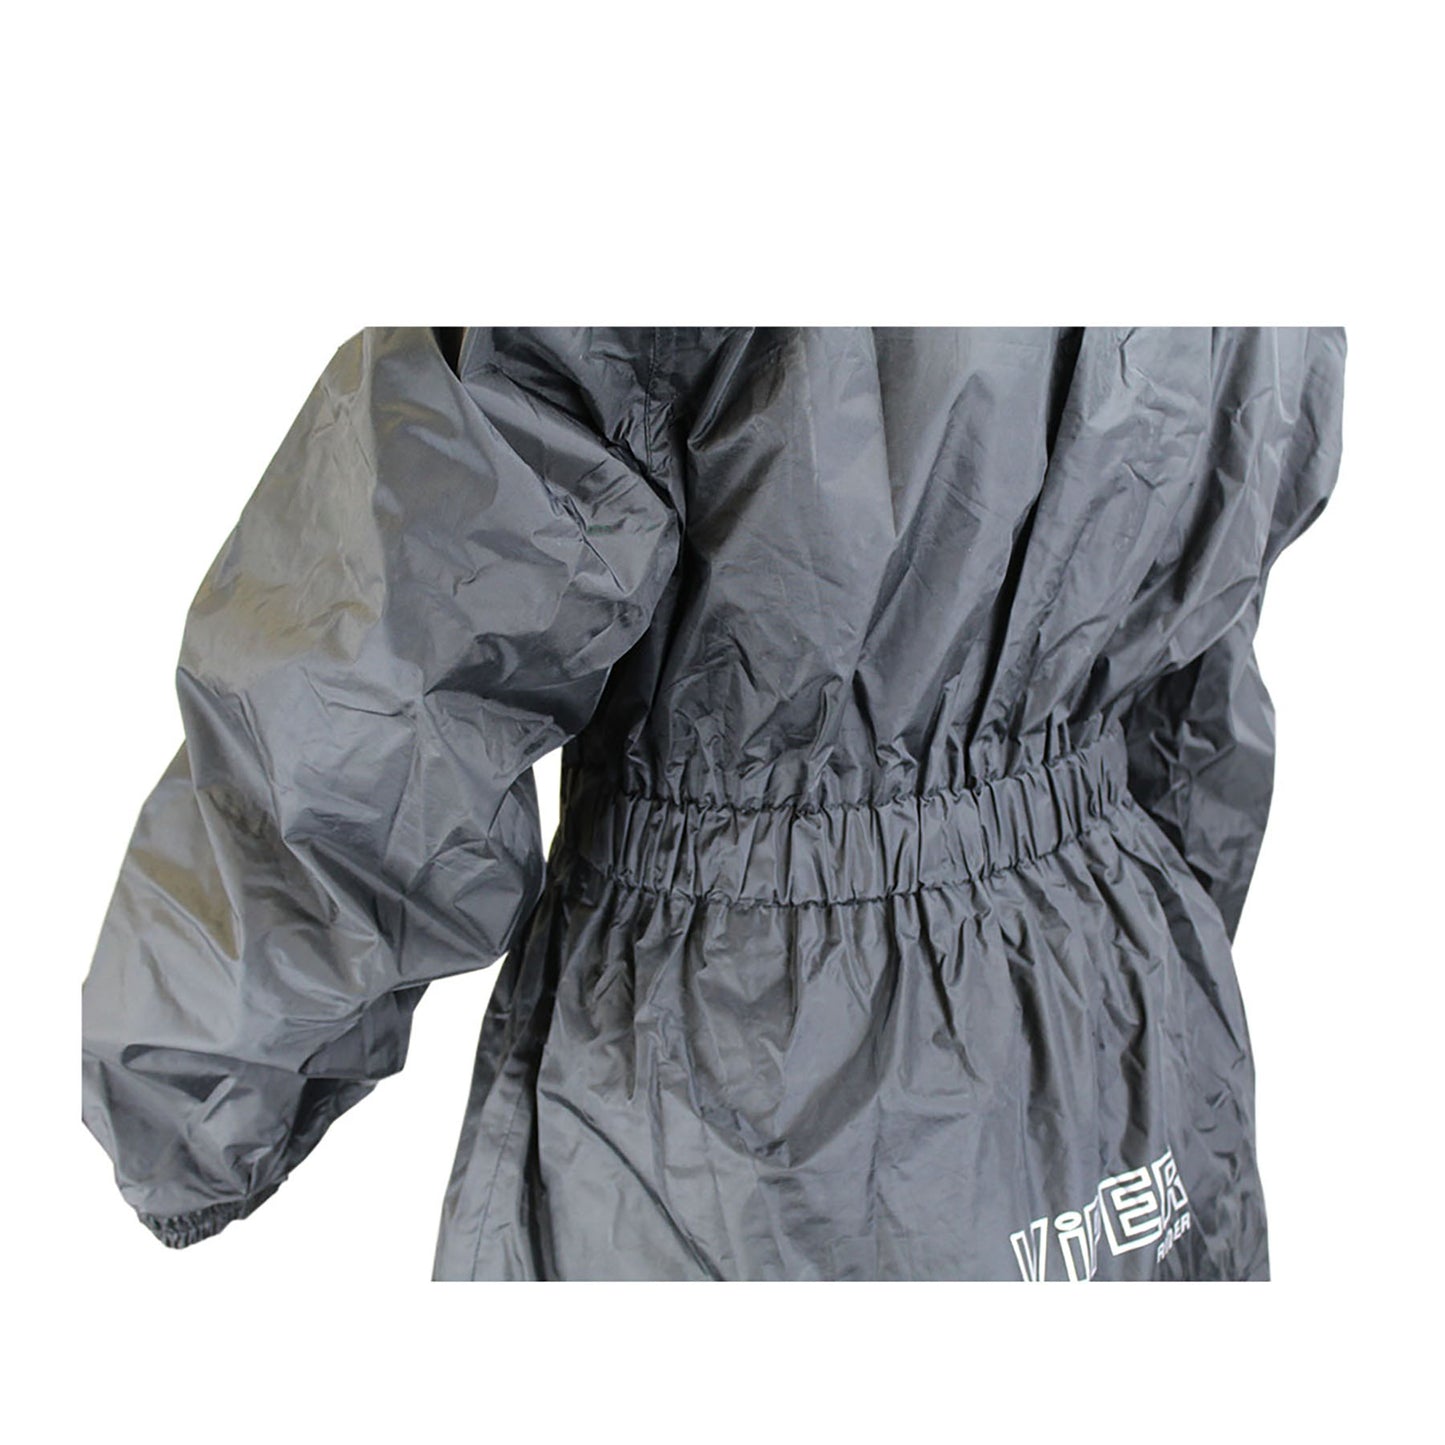 Viper H2Out Over Jacket Waterproof Black